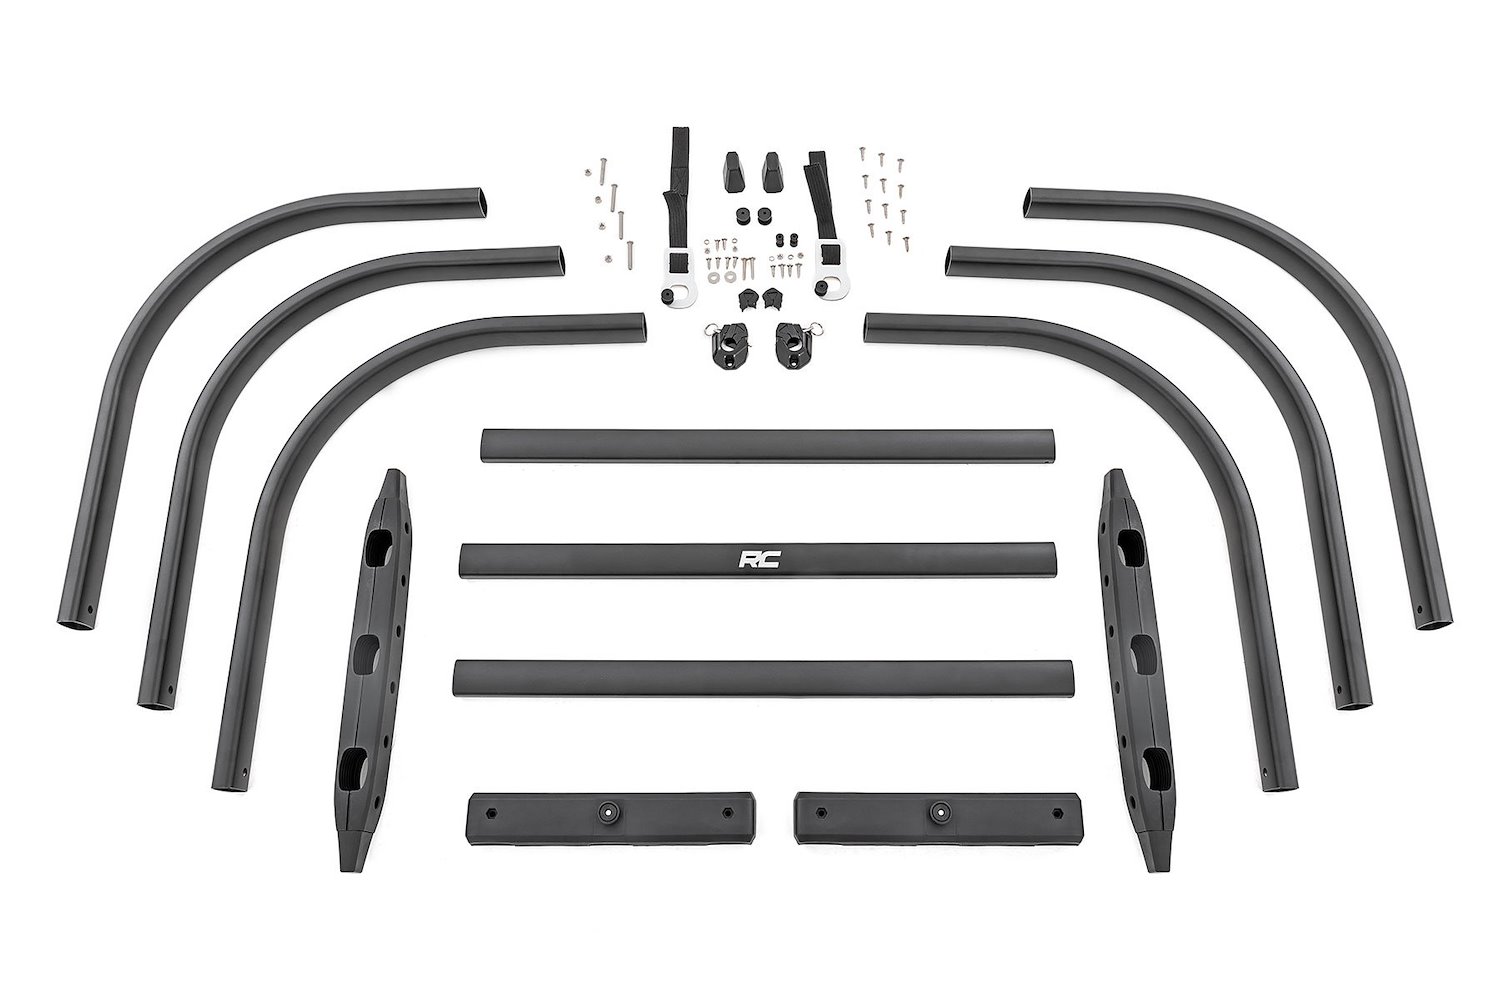 73111 Bed Extender, 26" Extension, Multiple Makes & Models (Chevy/Ford/GMC/Ram/Toyota)